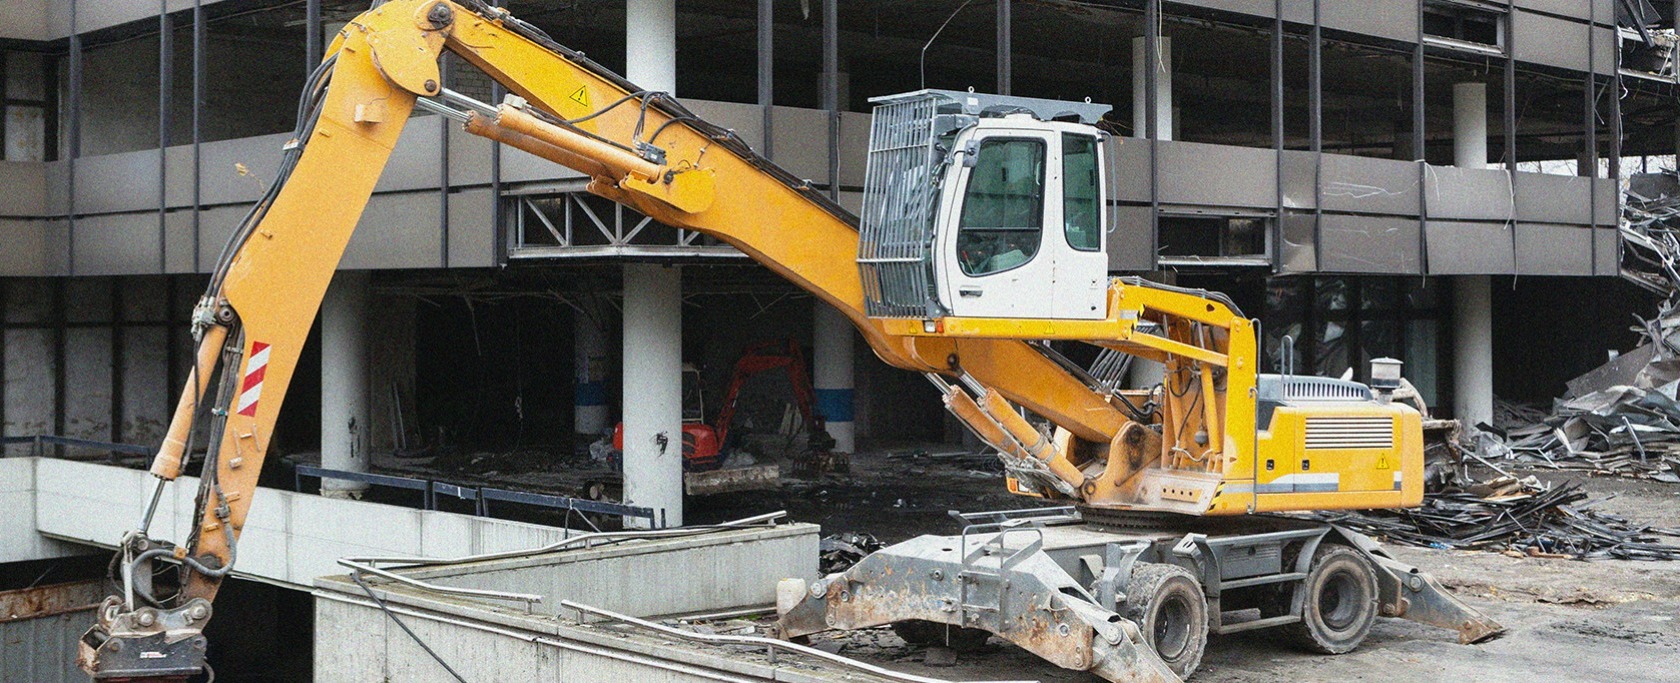 Demolition clauses in commercial leases